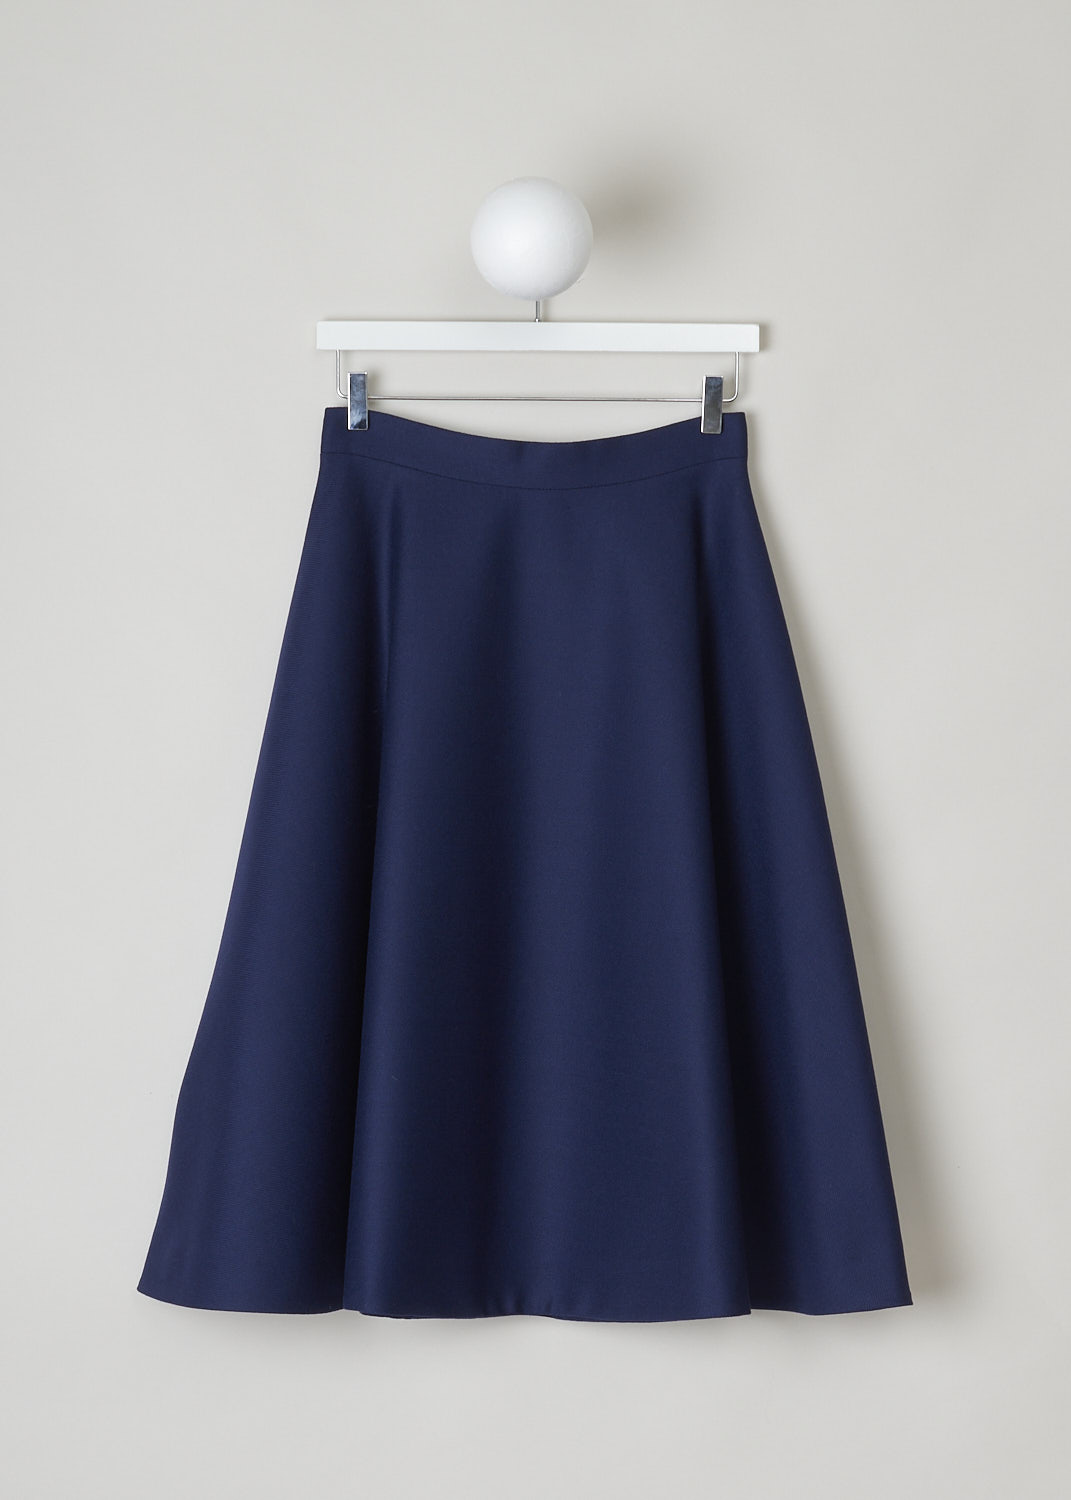 MARNI, NAVY BLUE WOOL MIDI SKIRT, GOMA0300U0_TW902_00B81, Blue, Front, This navy blue wool midi skirt has an A-line silhouette with a straight hemline. The skirt has a concealed centre zip in the back. 
